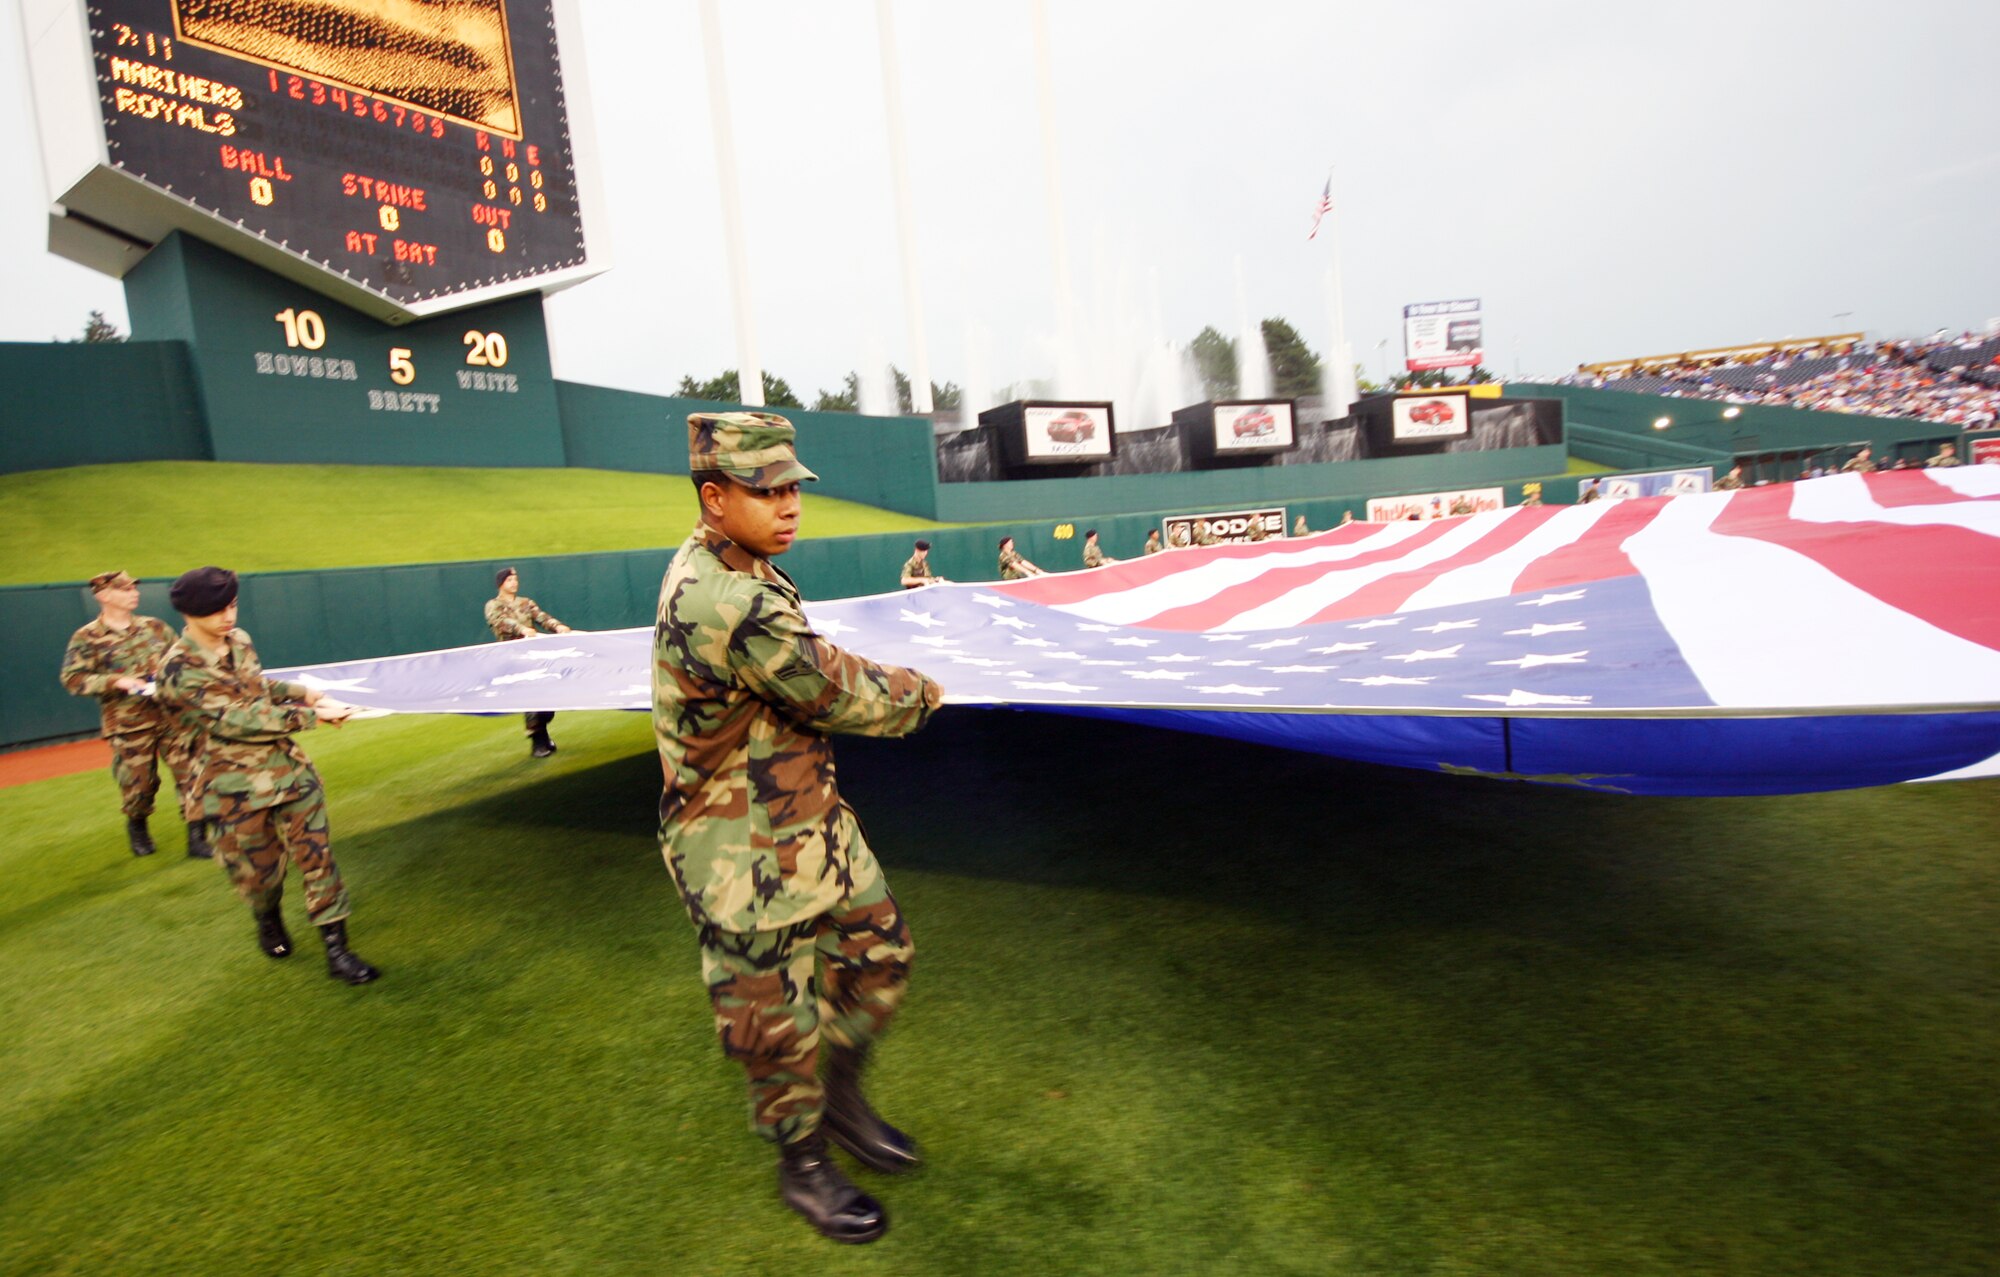 KANSAS CITY, Mo. - More than 30 Team Whiteman members prepare the flag for display during the National Anthem July 4 at Kaufmann Stadium, home of the Kansas City Royals. (U.S. Air Force photo/Tech. Sgt. Matt Summers)